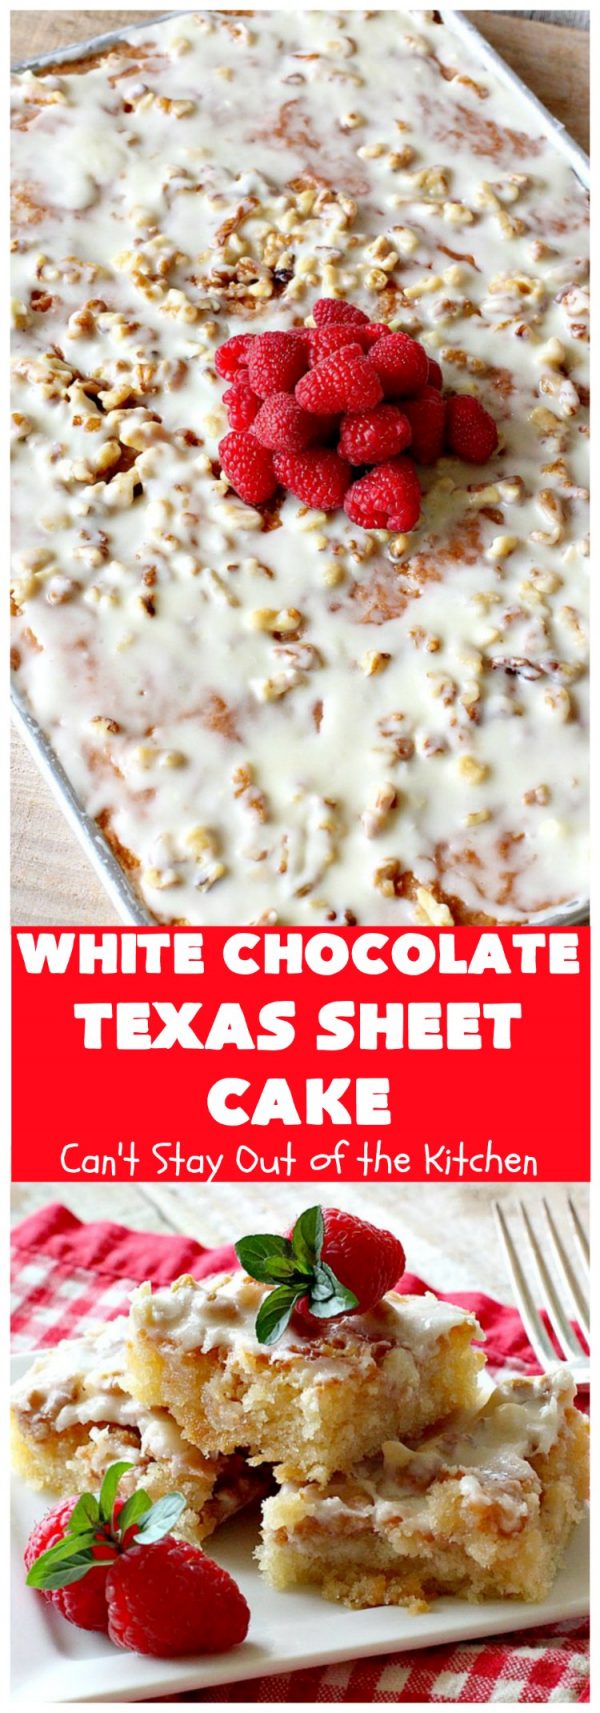 White Chocolate Texas Sheet Cake – Can't Stay Out of the Kitchen